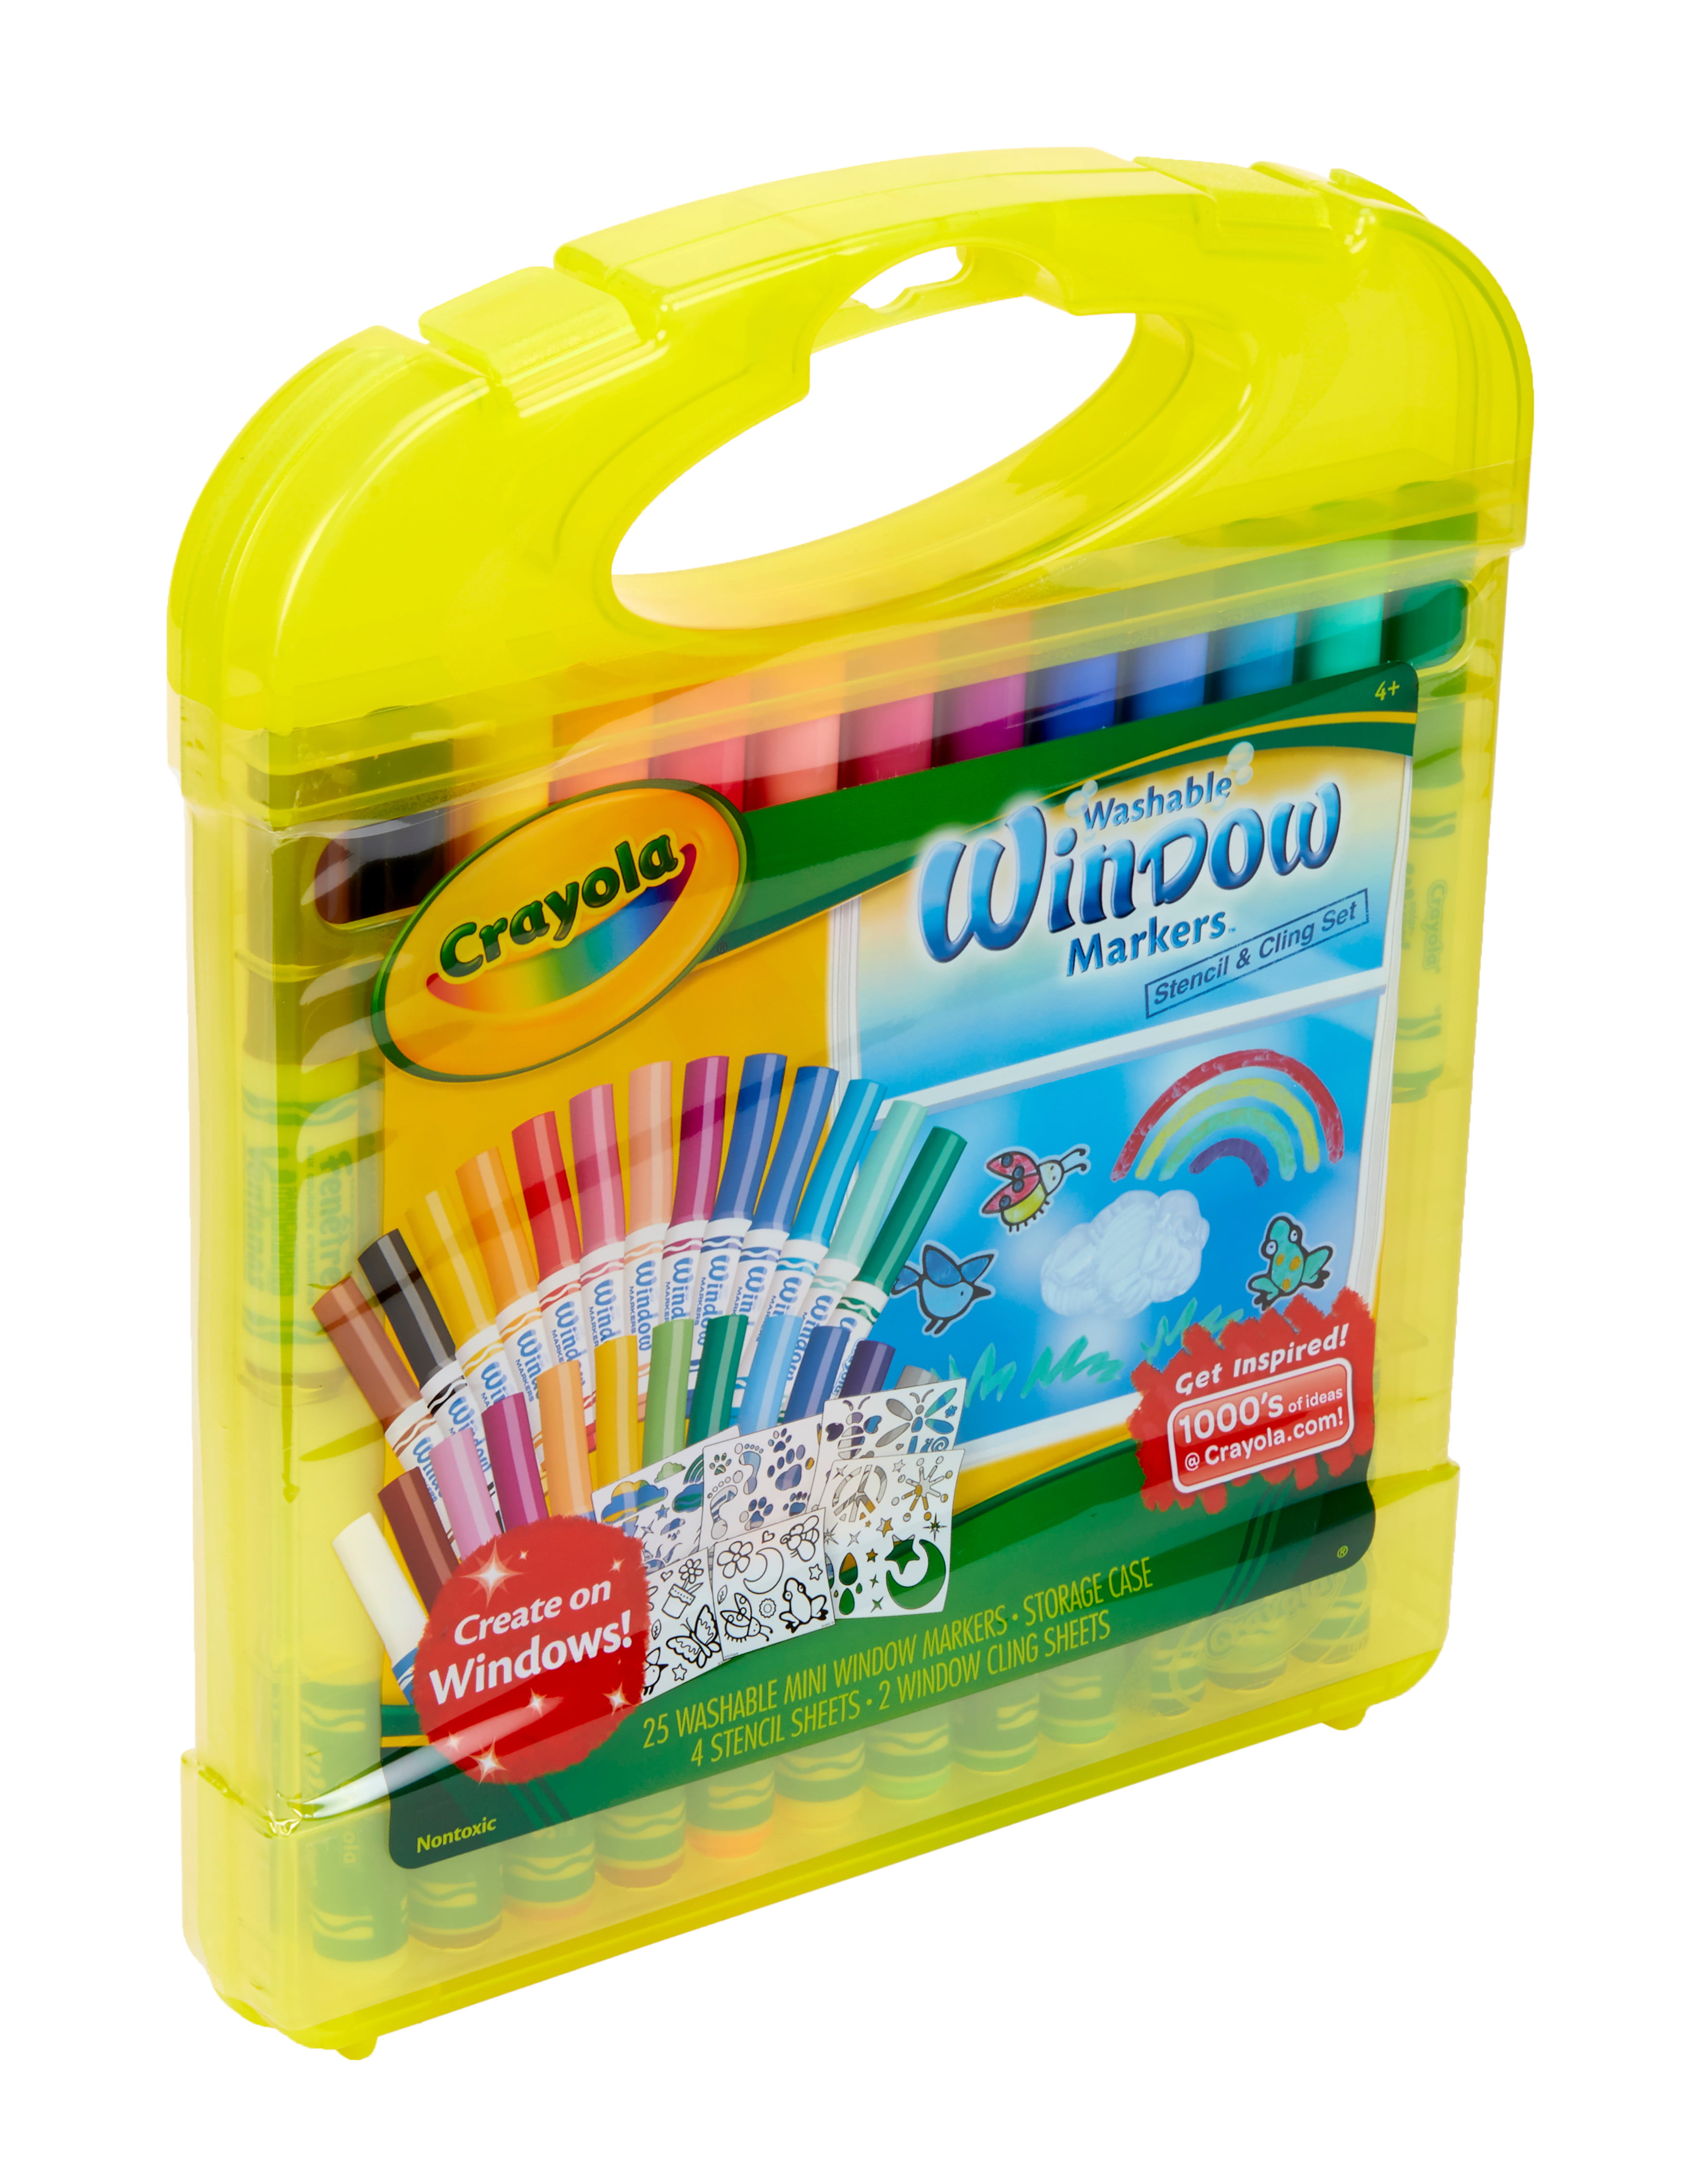 Crayola® Window Markers - Crayons, Markers & Pencils - Drawing Supplies -  The Craft Shop, Inc.